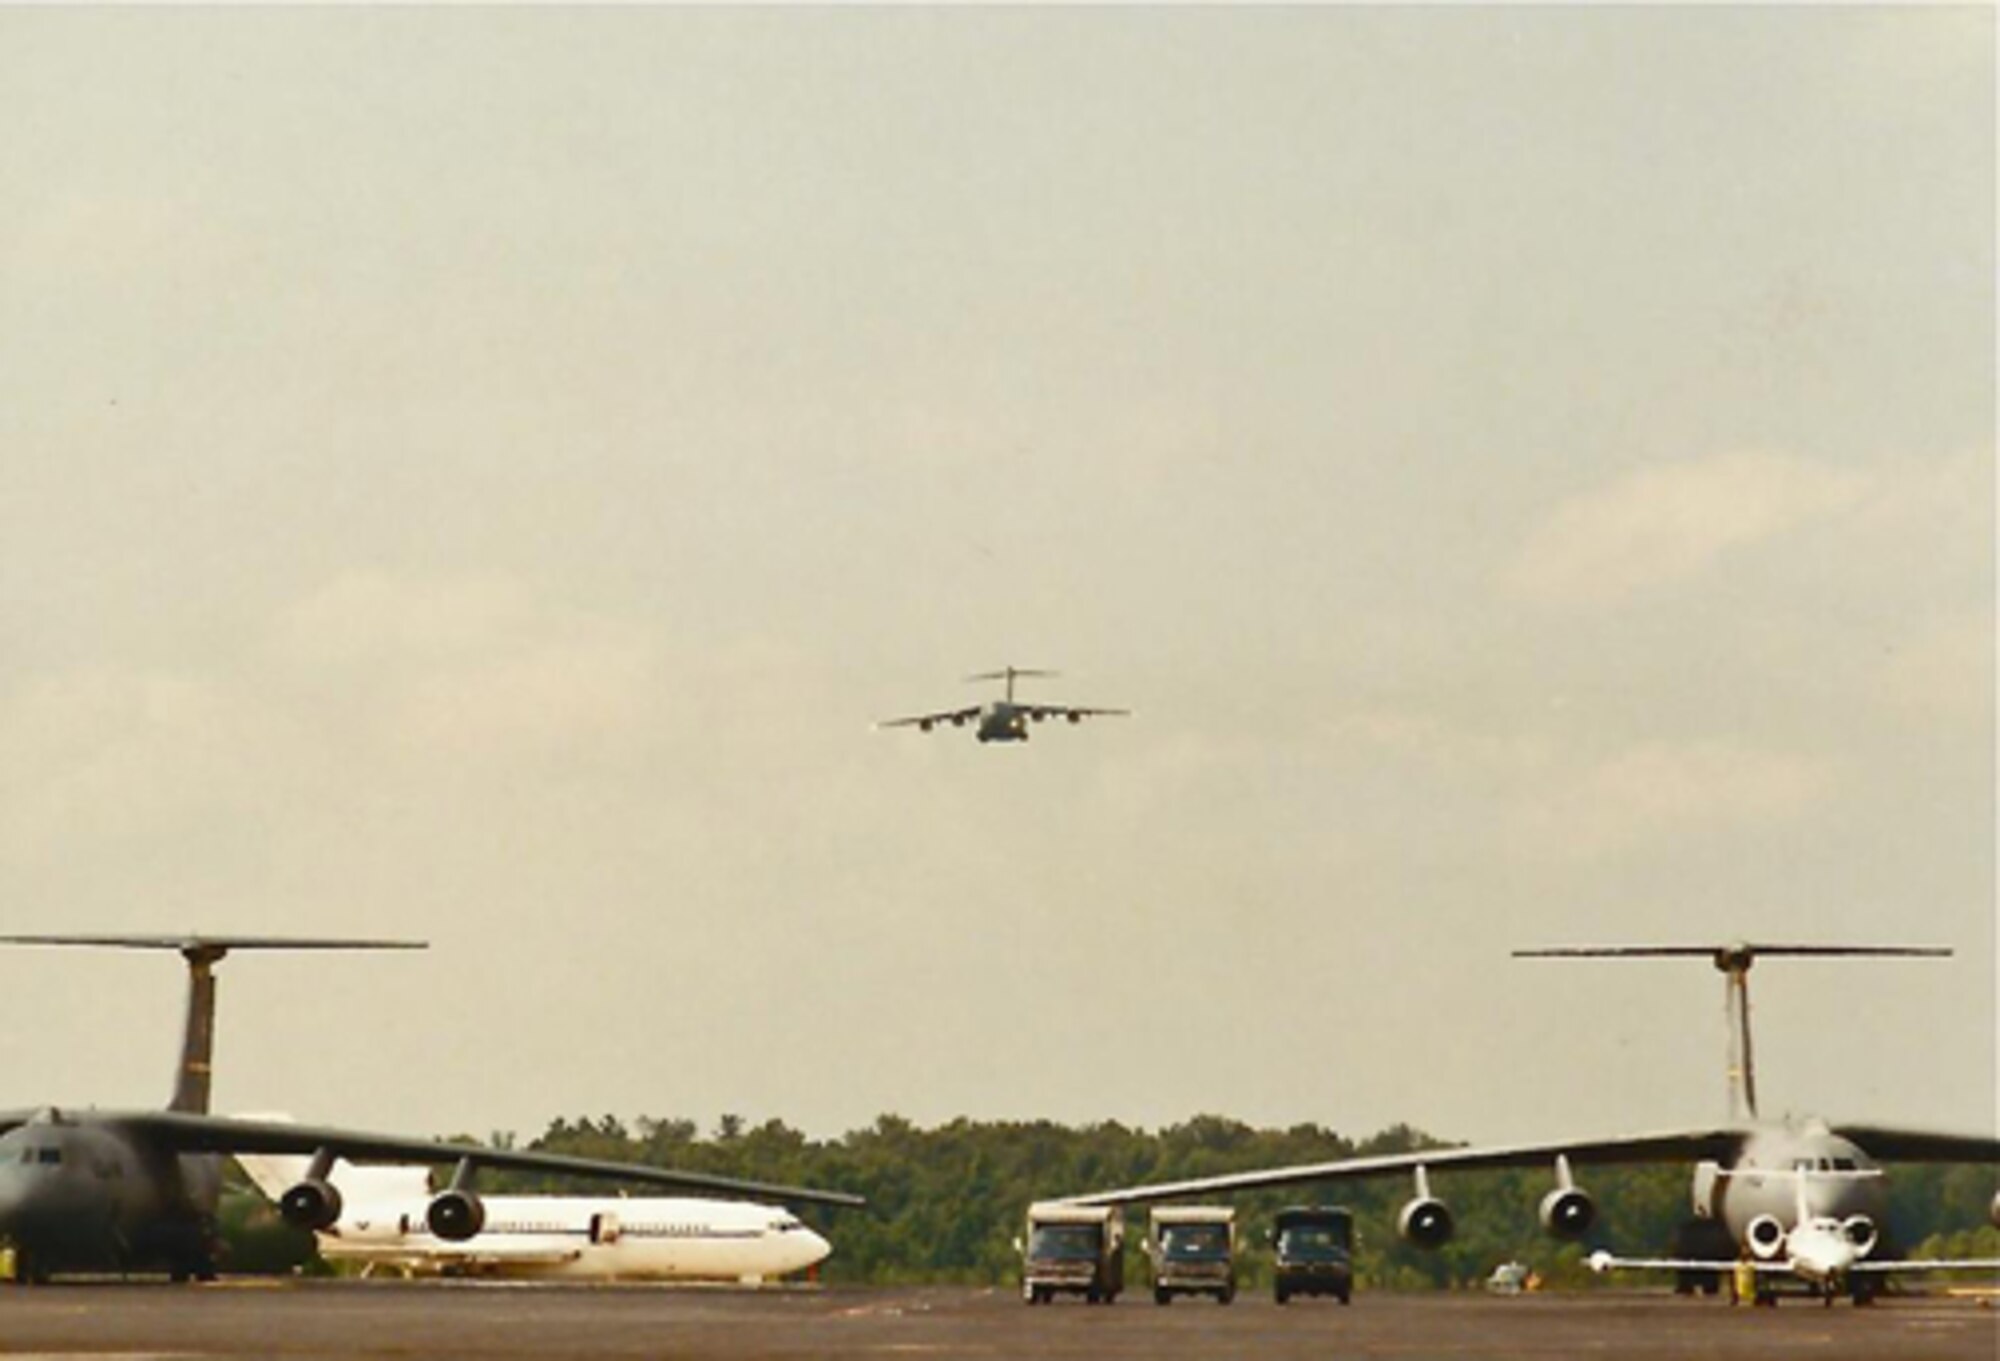 The Air Force's first C-17 arrives at Charleston Air Force Base, S.C.  June 14, 1993 approaches the runway amid a sea of C-141 Starlifthers. Now 20 years later the final Air Force C-17 will be arriving from the Boeing C-17 factory Sept. 12, 2013. (Courtesy Photo)